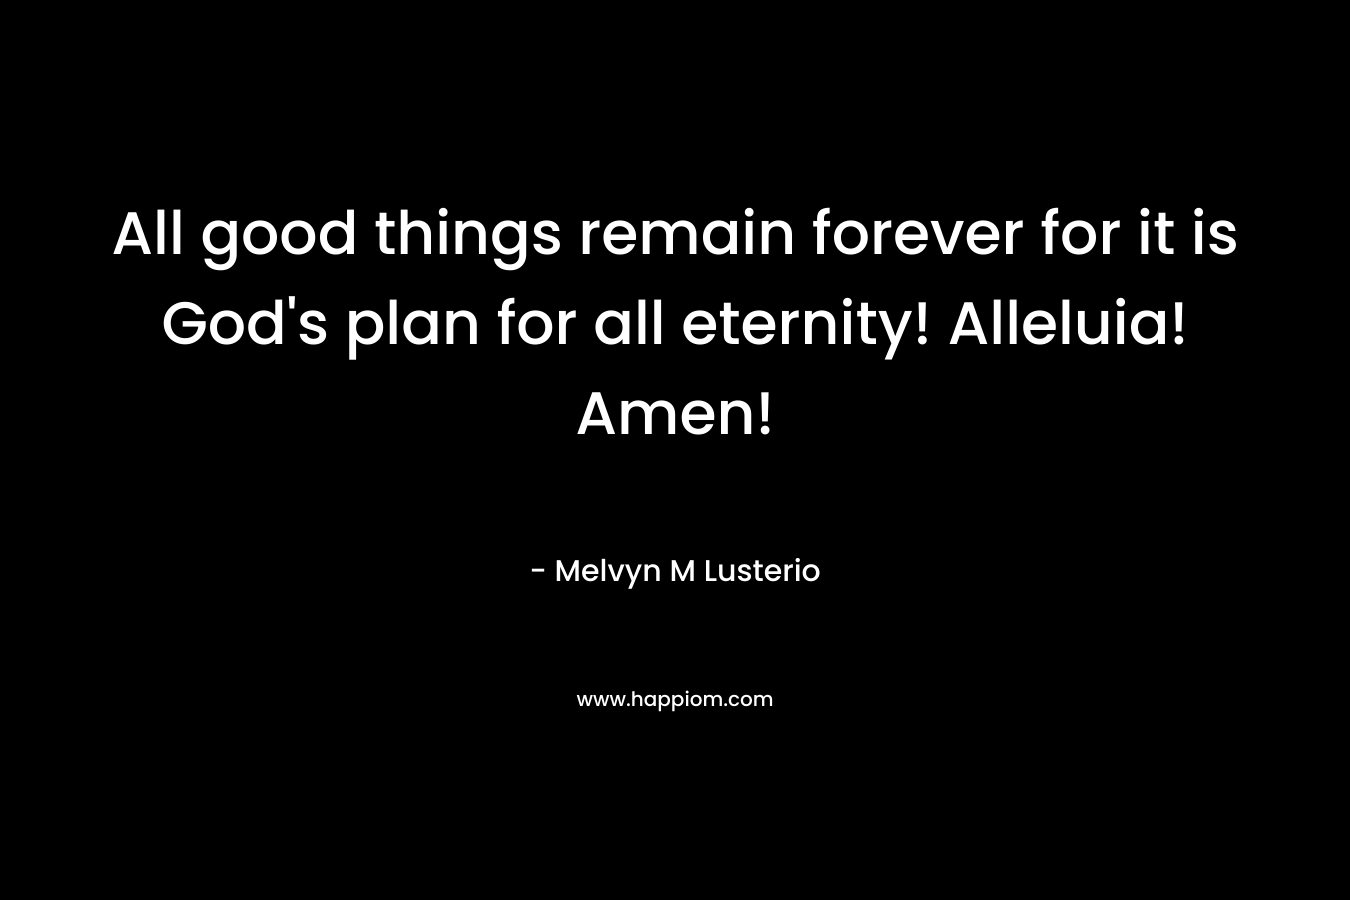 All good things remain forever for it is God’s plan for all eternity! Alleluia! Amen!  – Melvyn M Lusterio